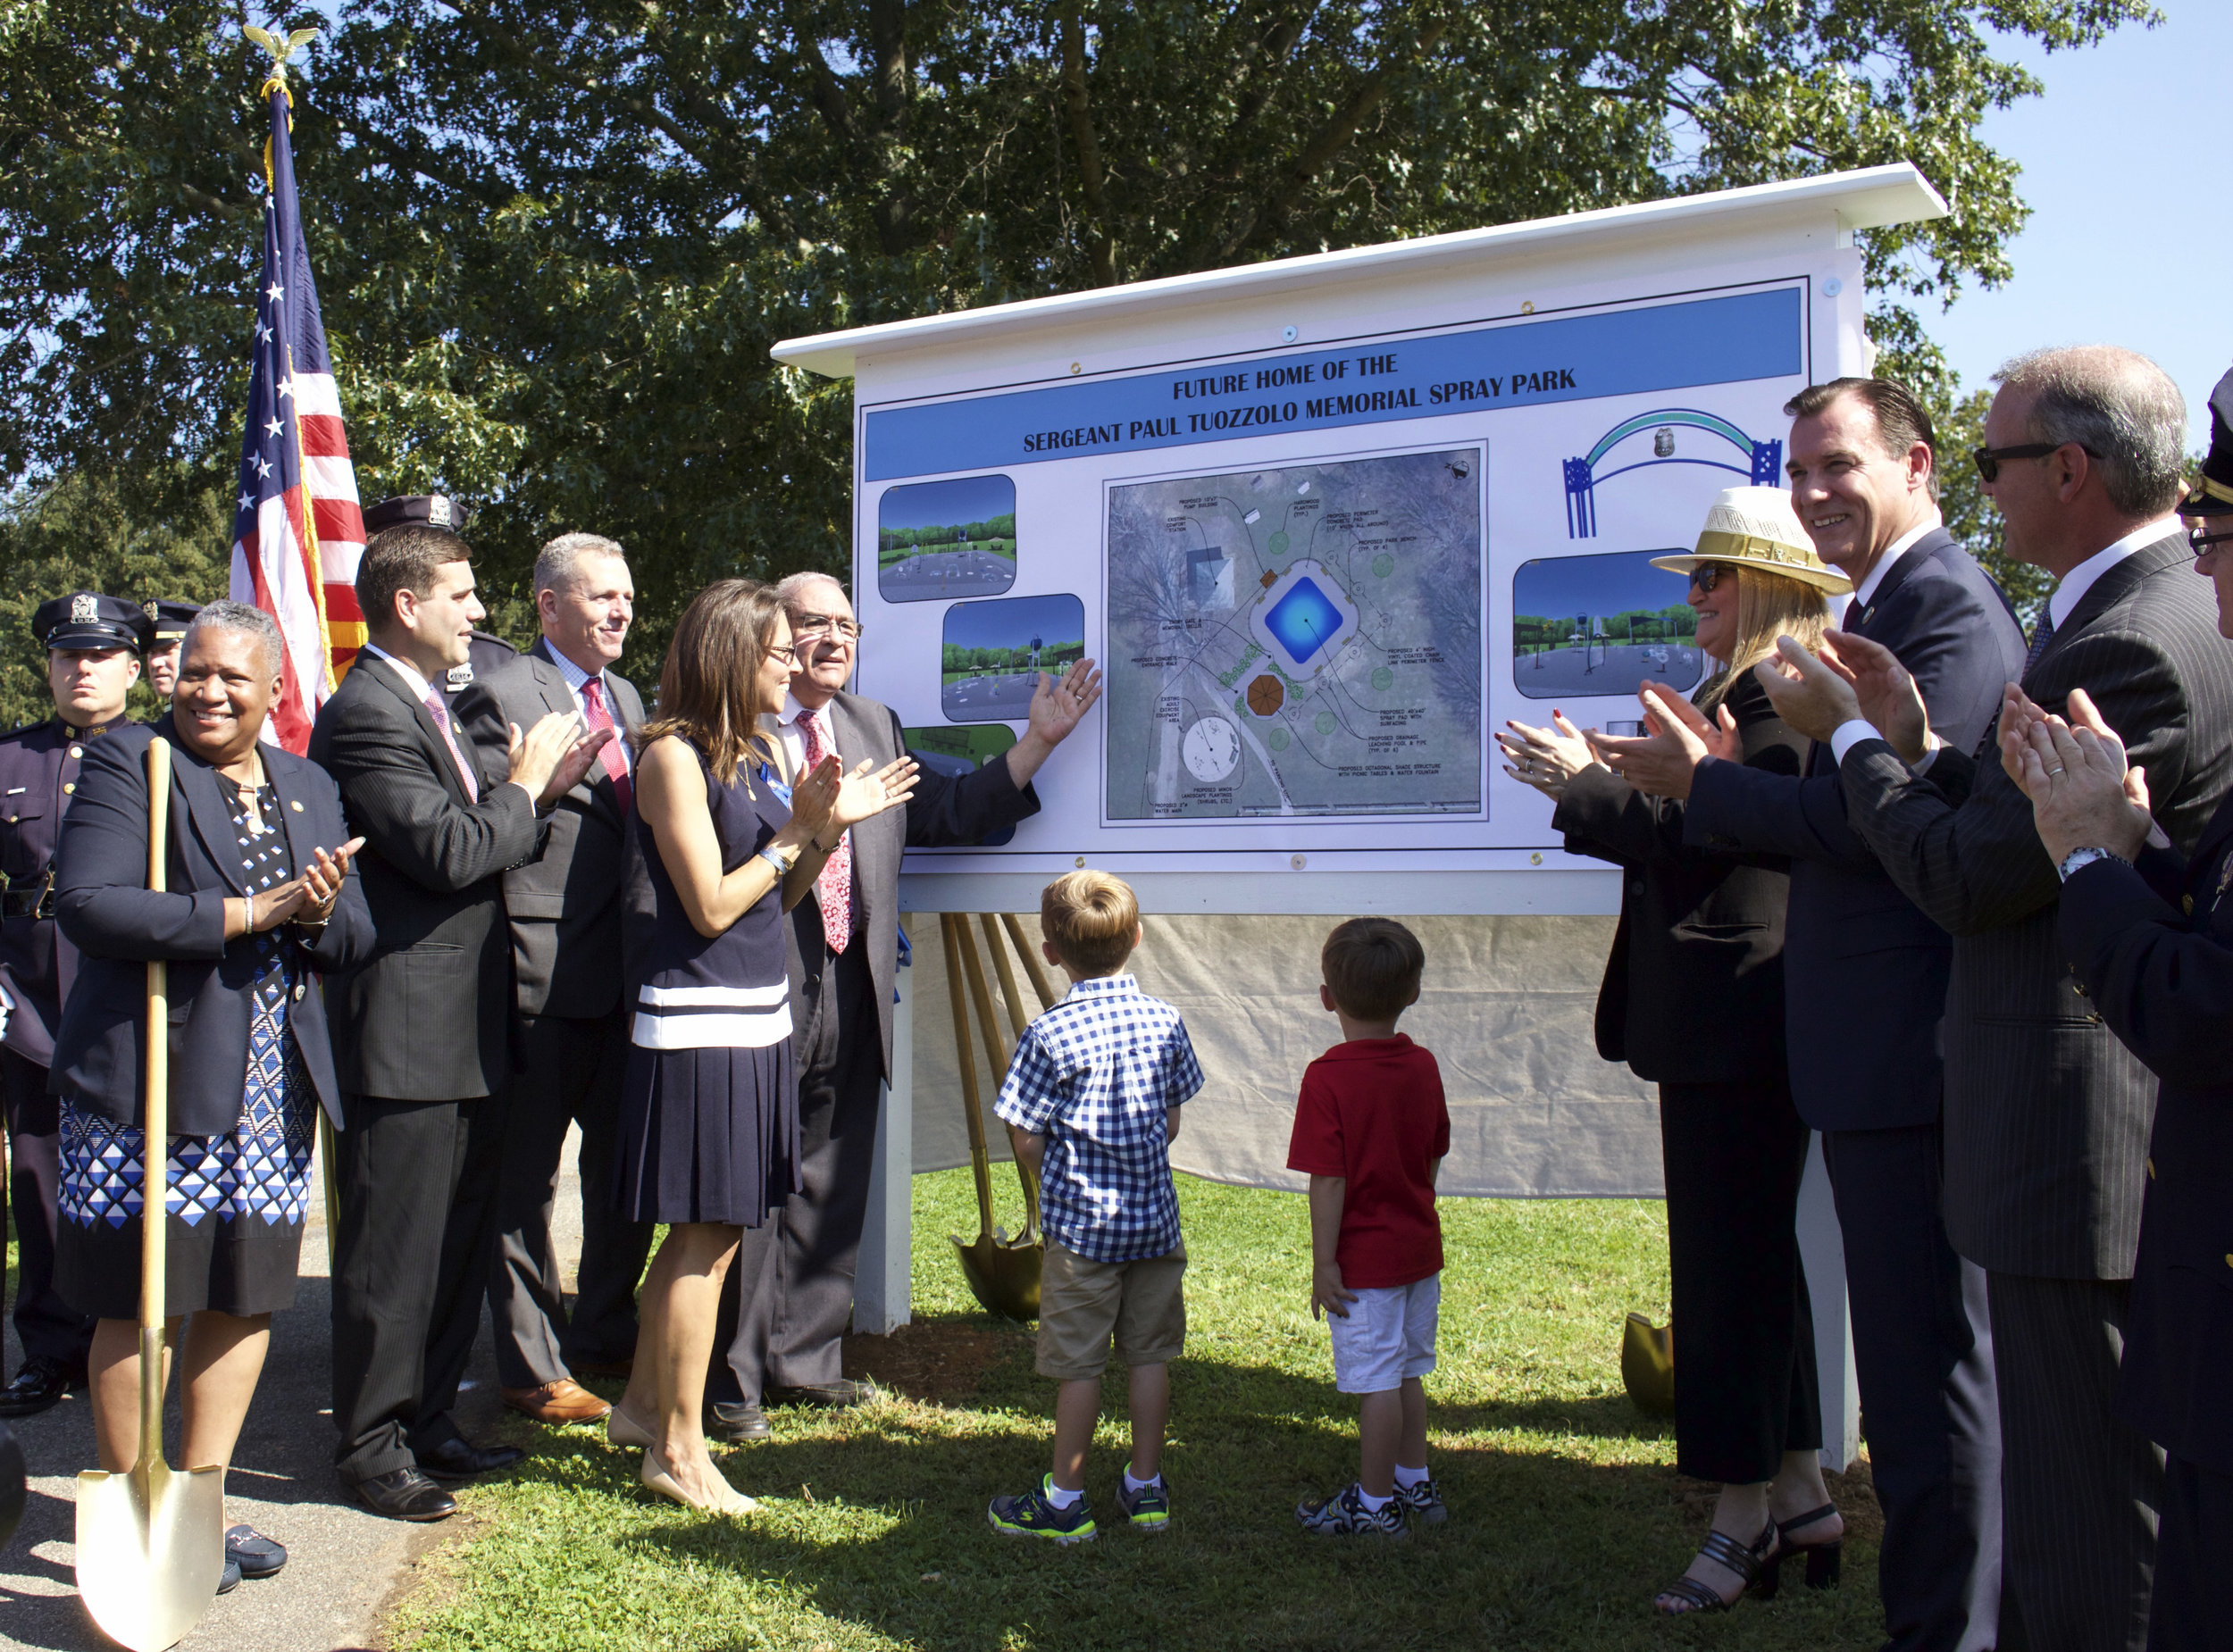   Austin, 5, and Joseph, 4, Tuozzolo, center, look up at the sign depicting plans for the Sgt. Paul Tuozzolo Memorial Spray Park, set to open in Elwood Park next summer.   Long Islander News photo/Janee Law  